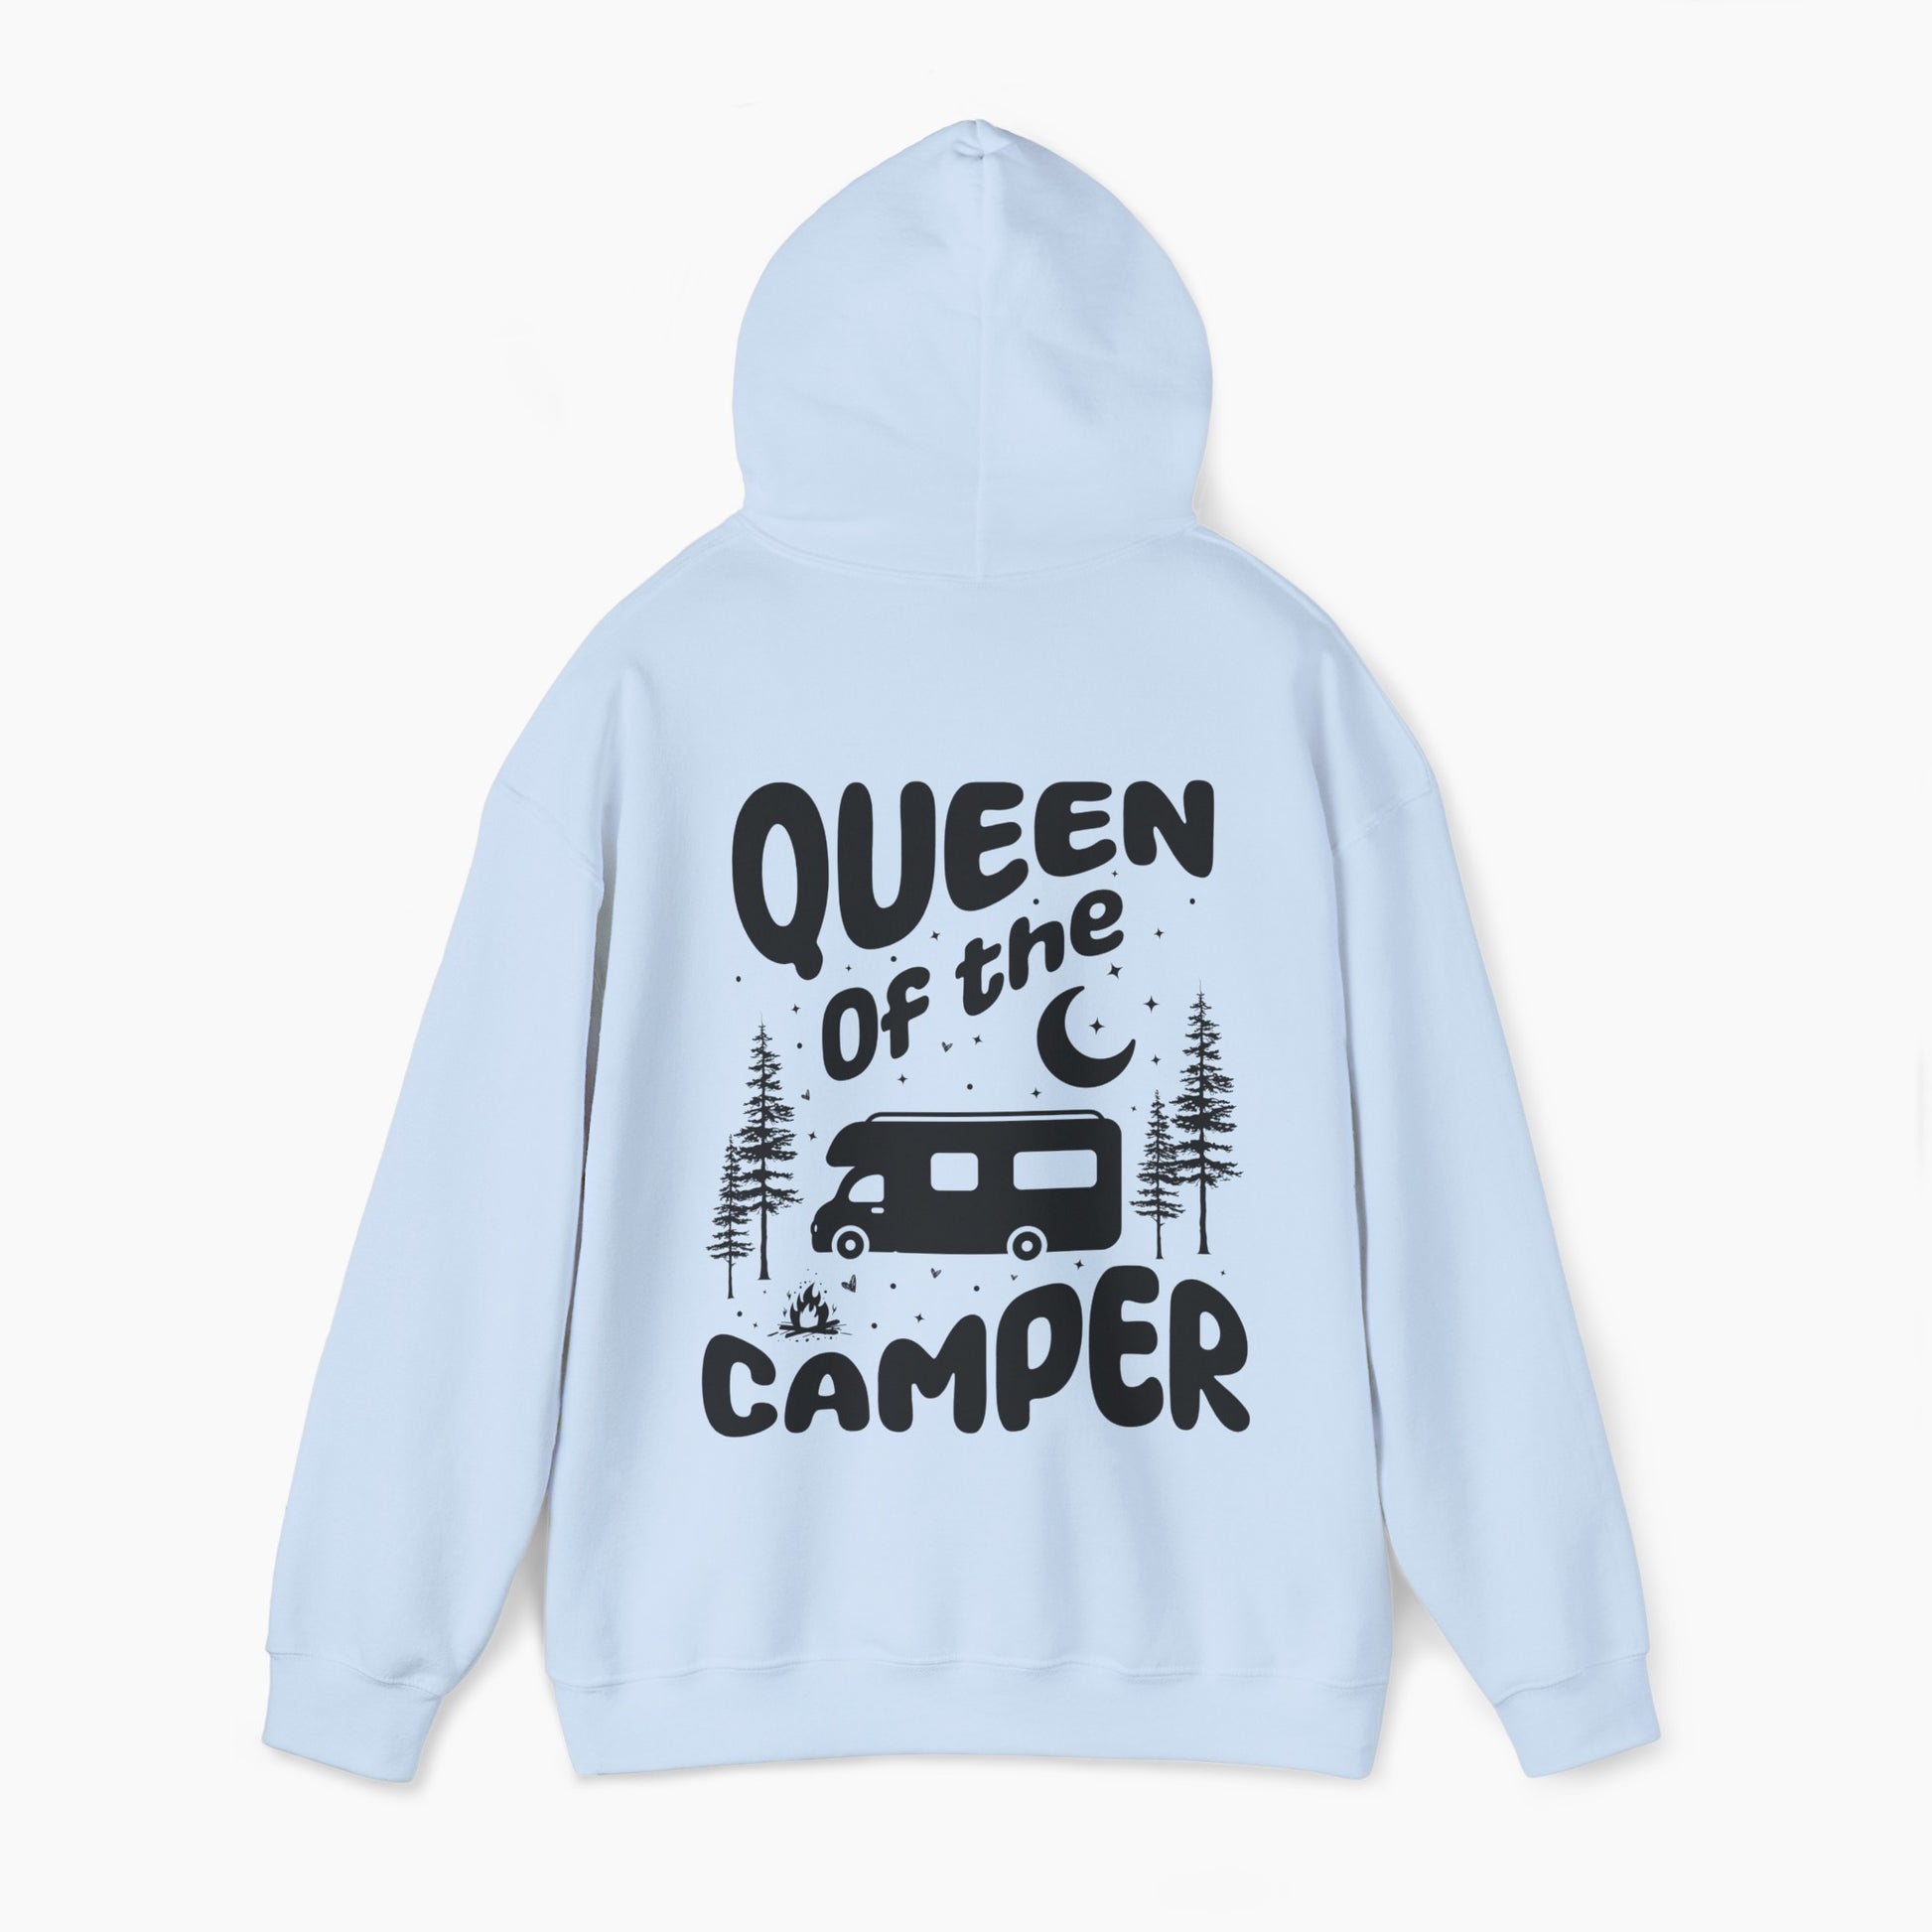 Back of a light blue hoodie with the text 'Queen of the Camper' surrounded by elements including a camping van, stars, trees, and a campfire, on a plain background.